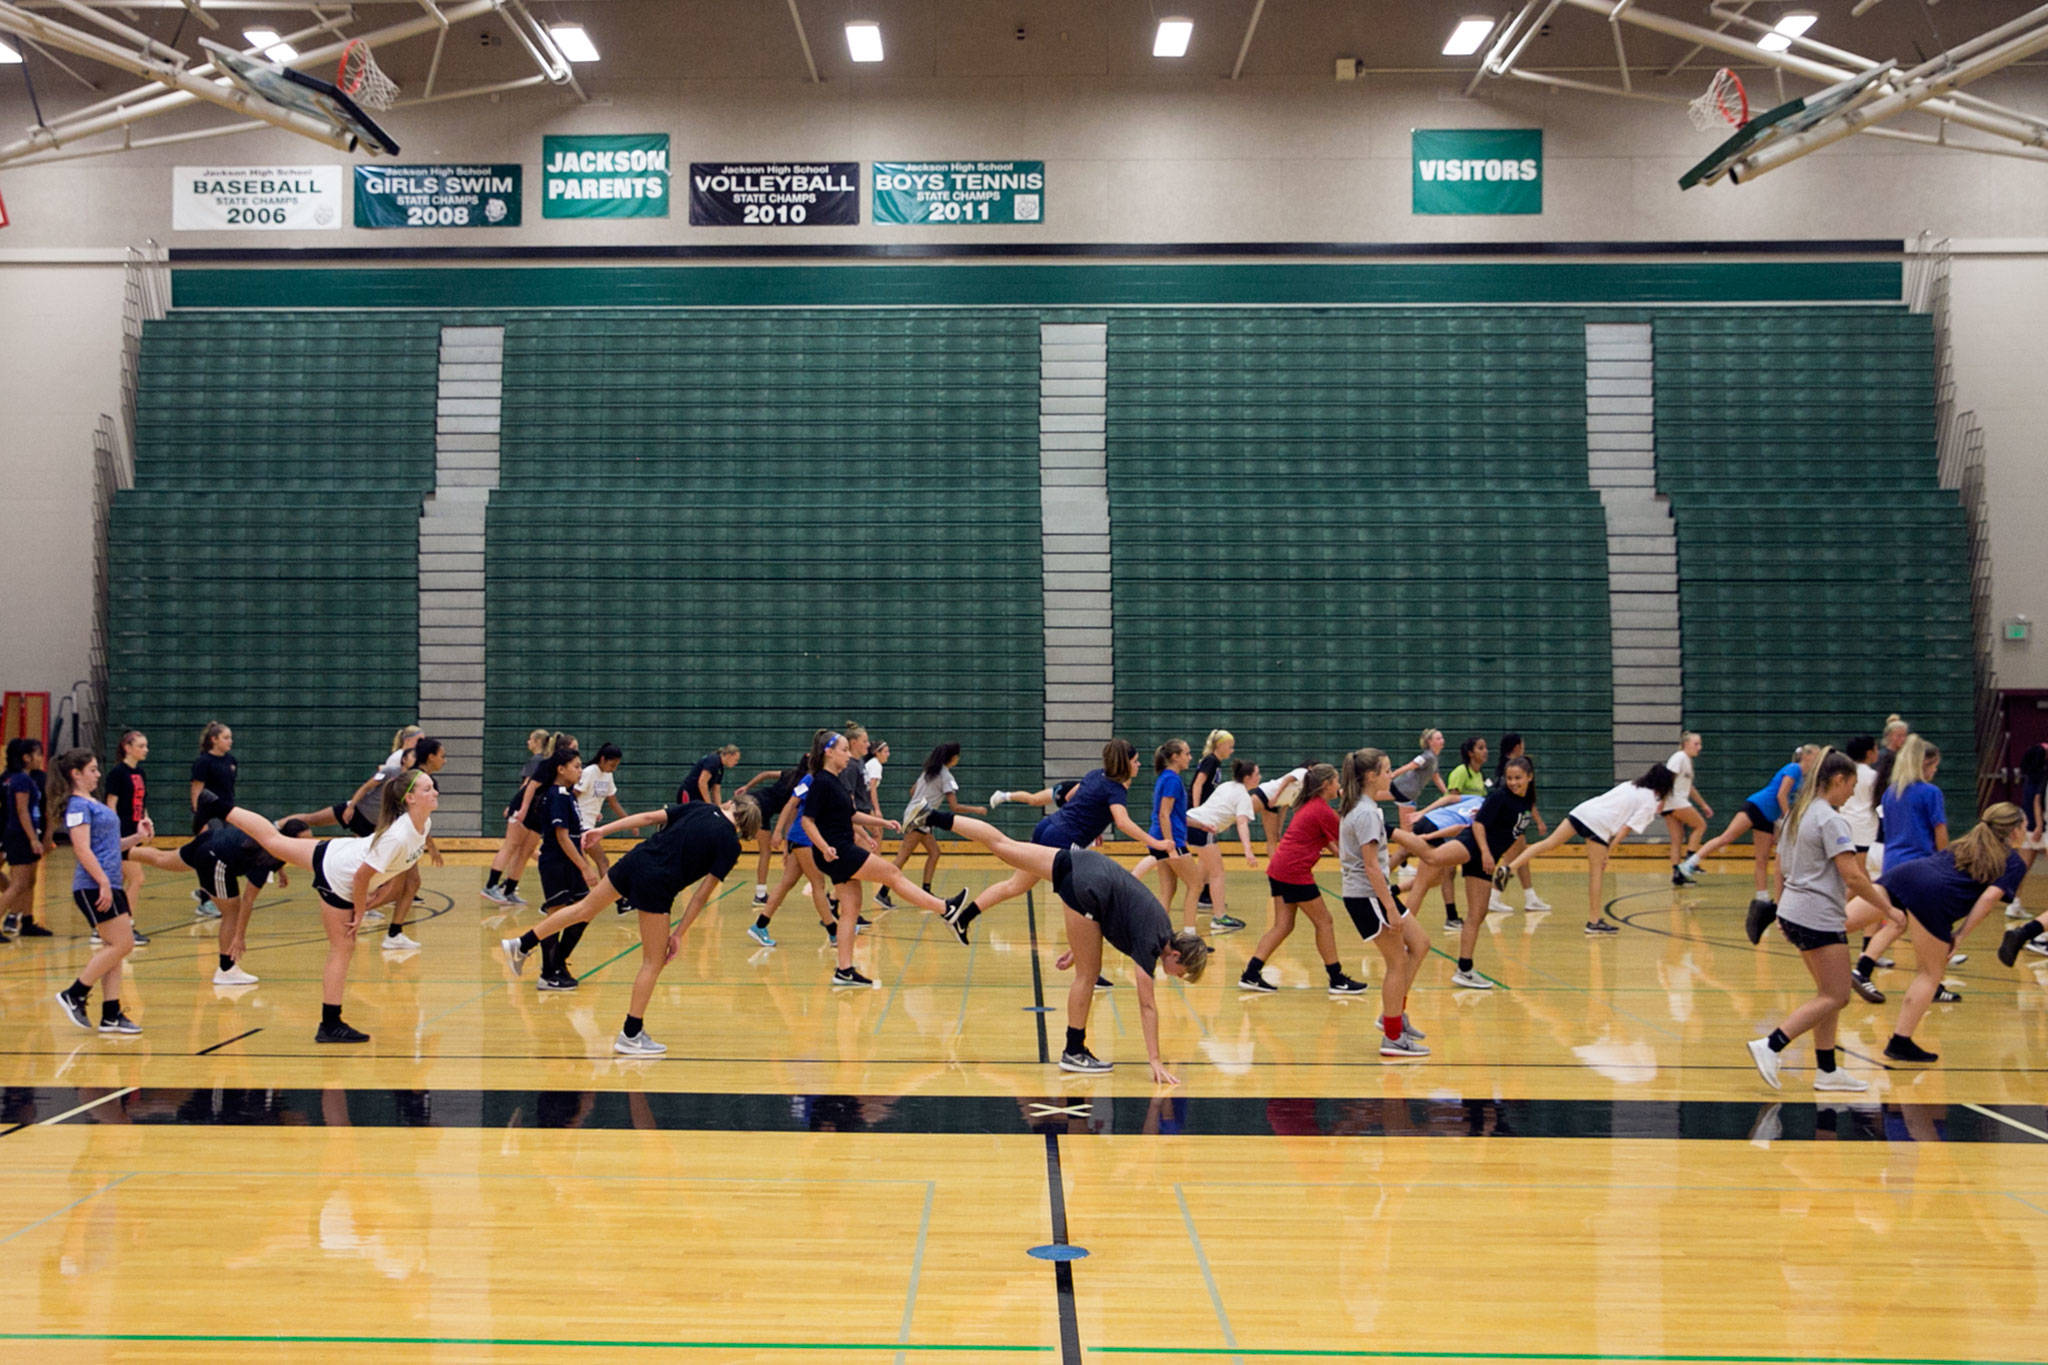 Jackson High School soccer hopefuls stretch before scrimmages in the school gym due to poor air quality in Mill Creek on August 21, 2018. (Kevin Clark / The Herald)